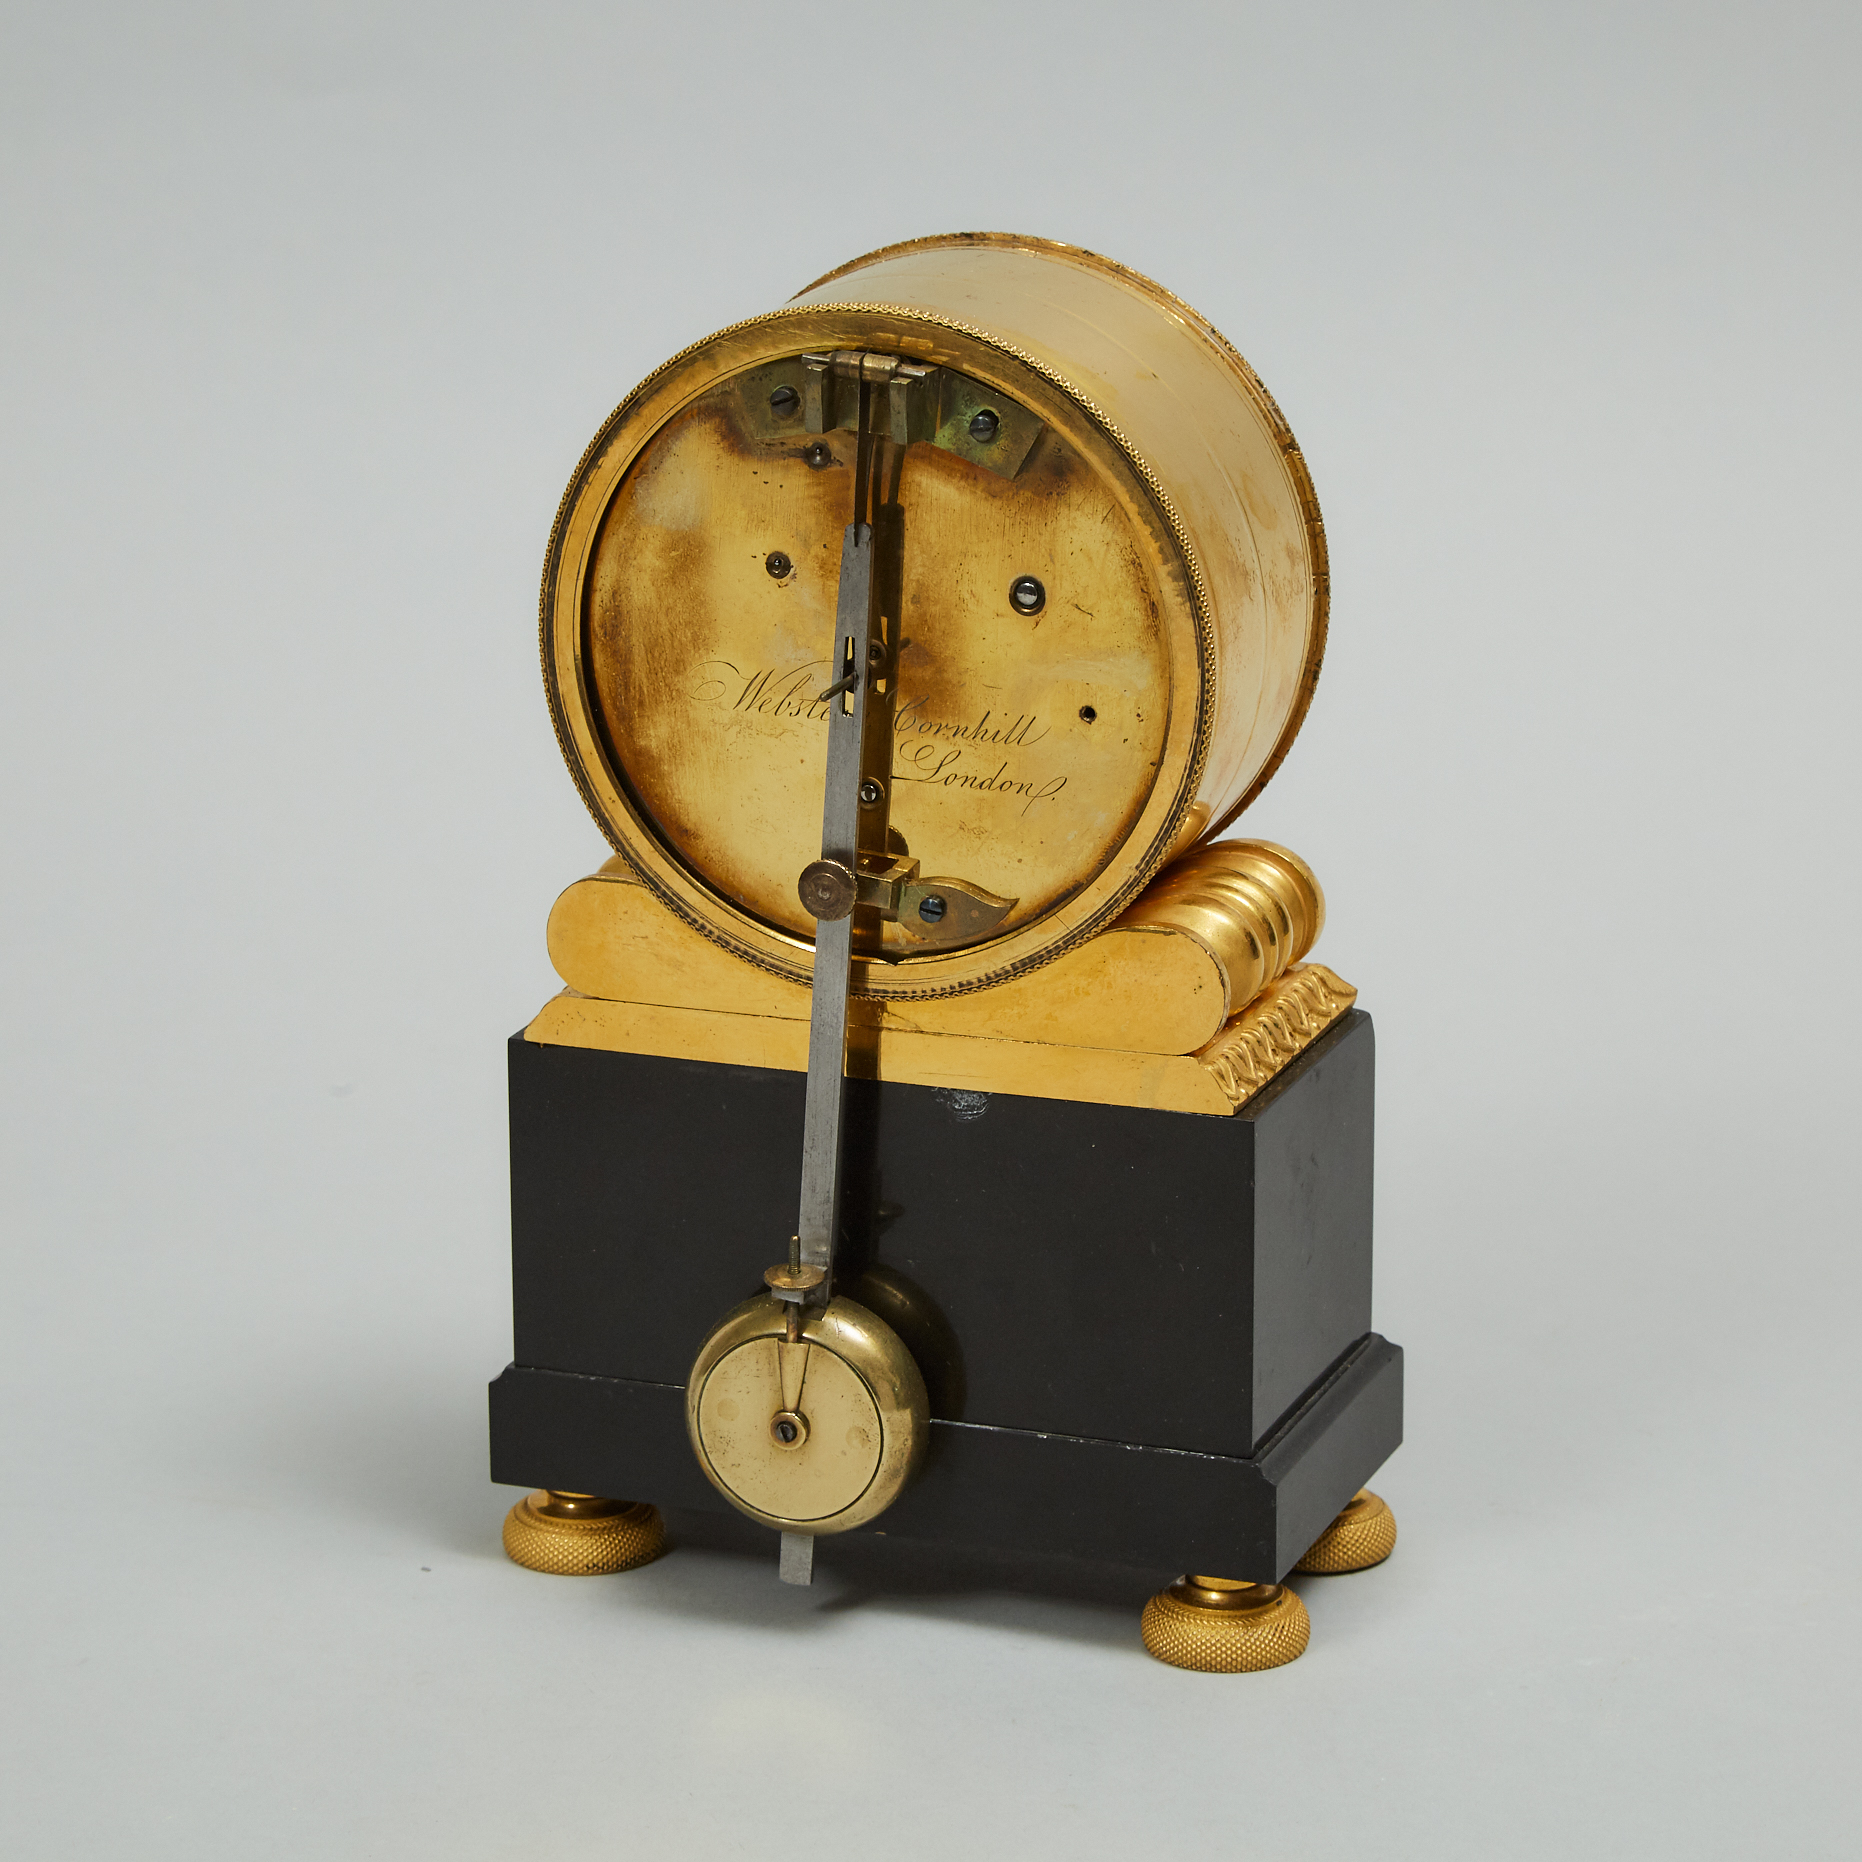 English Regency Gilt Bronze and Marble Drumhead Timepiece, Richard Webster, Cornhill, London, early 19th century